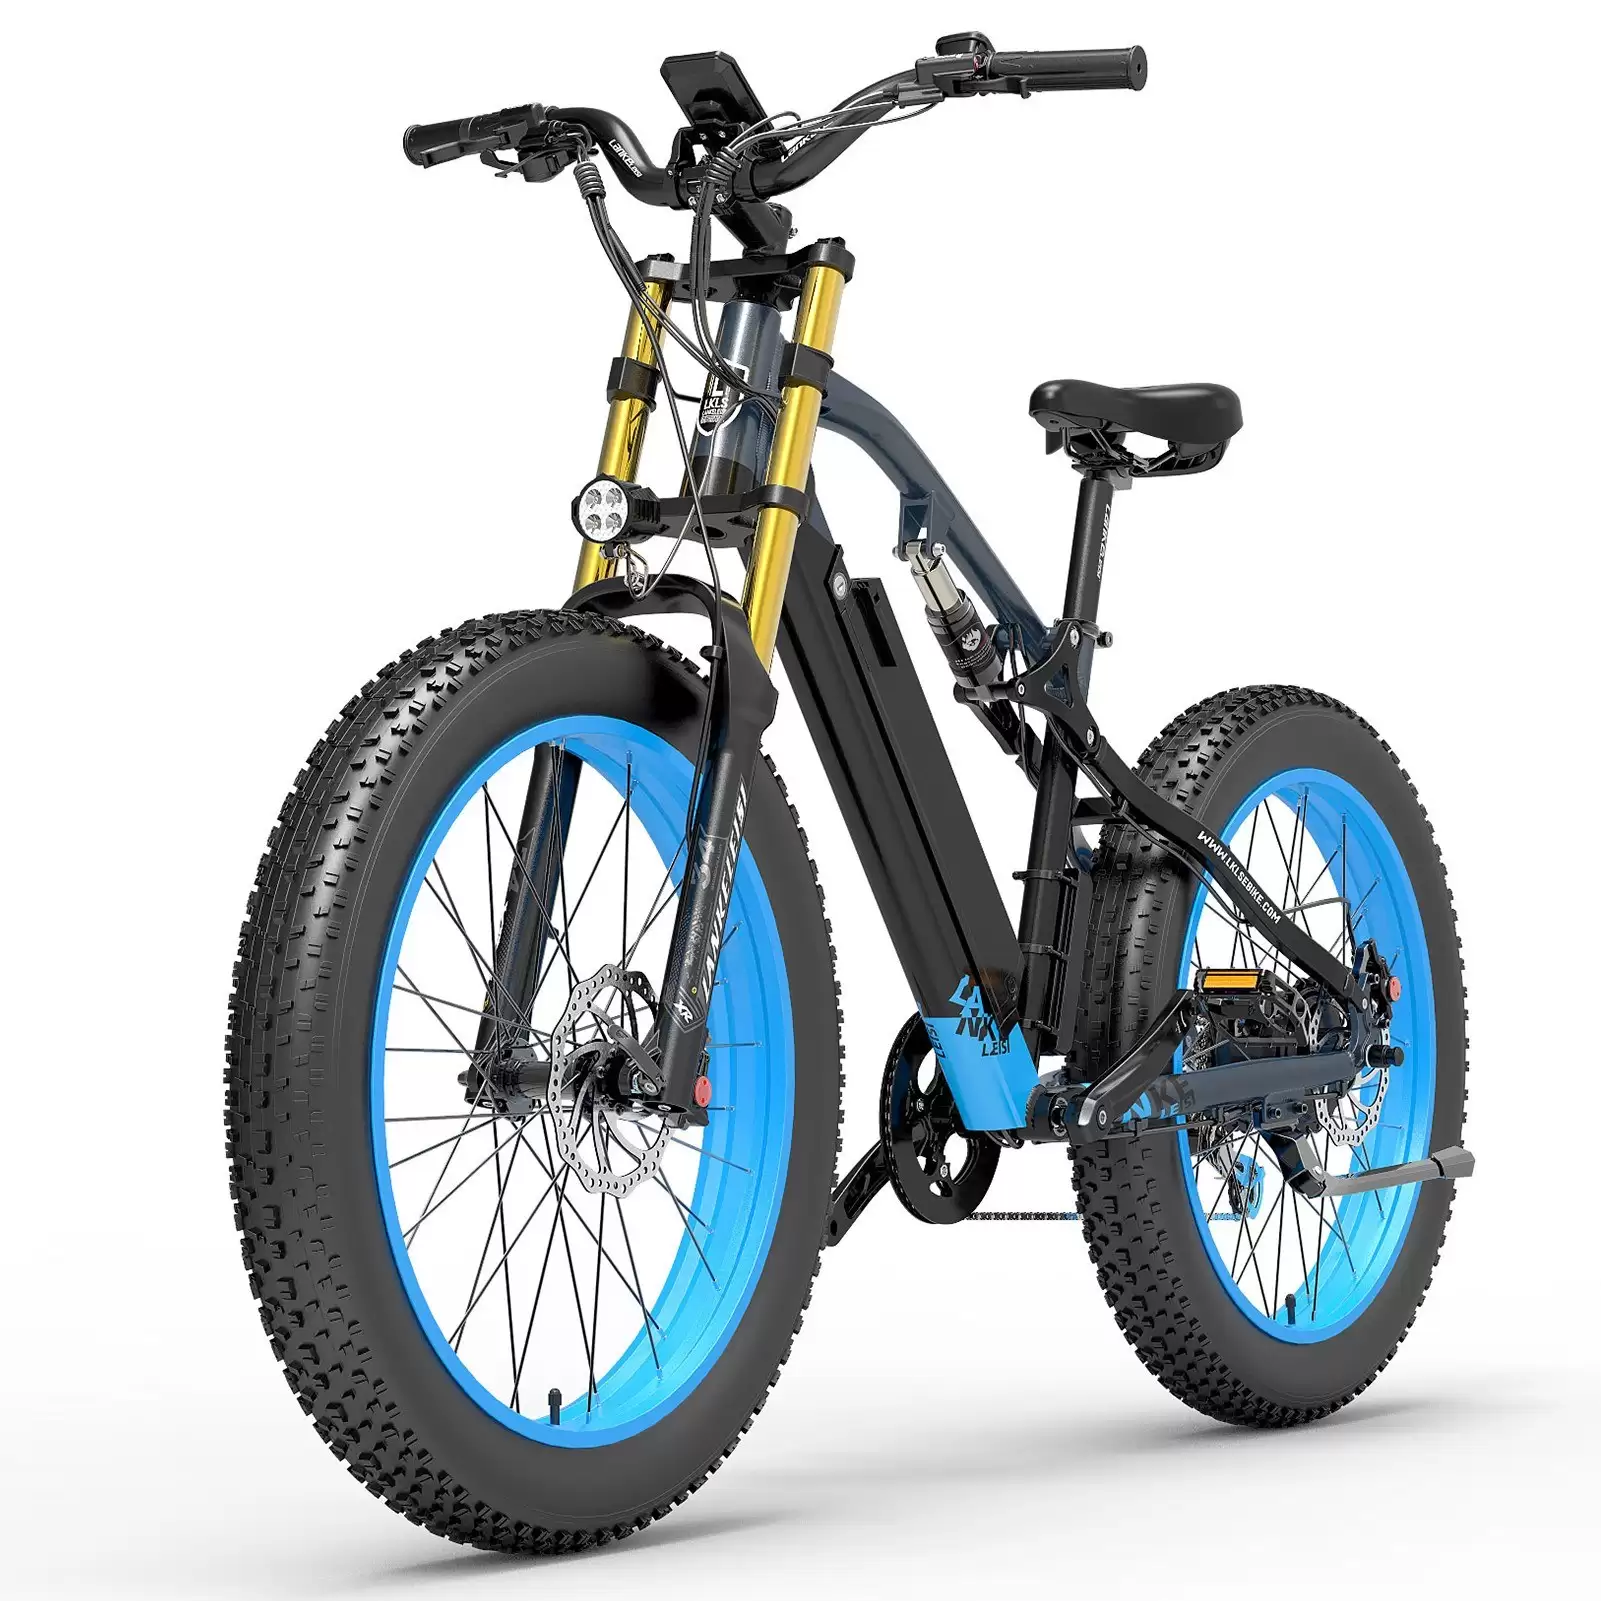 Order In Just Rs.1399.98 Lankeleisi Rv700 Ebike 1000w Brushless Motor 26-inch Fat Tires Electric Bike With This Tomtop Discount Voucher